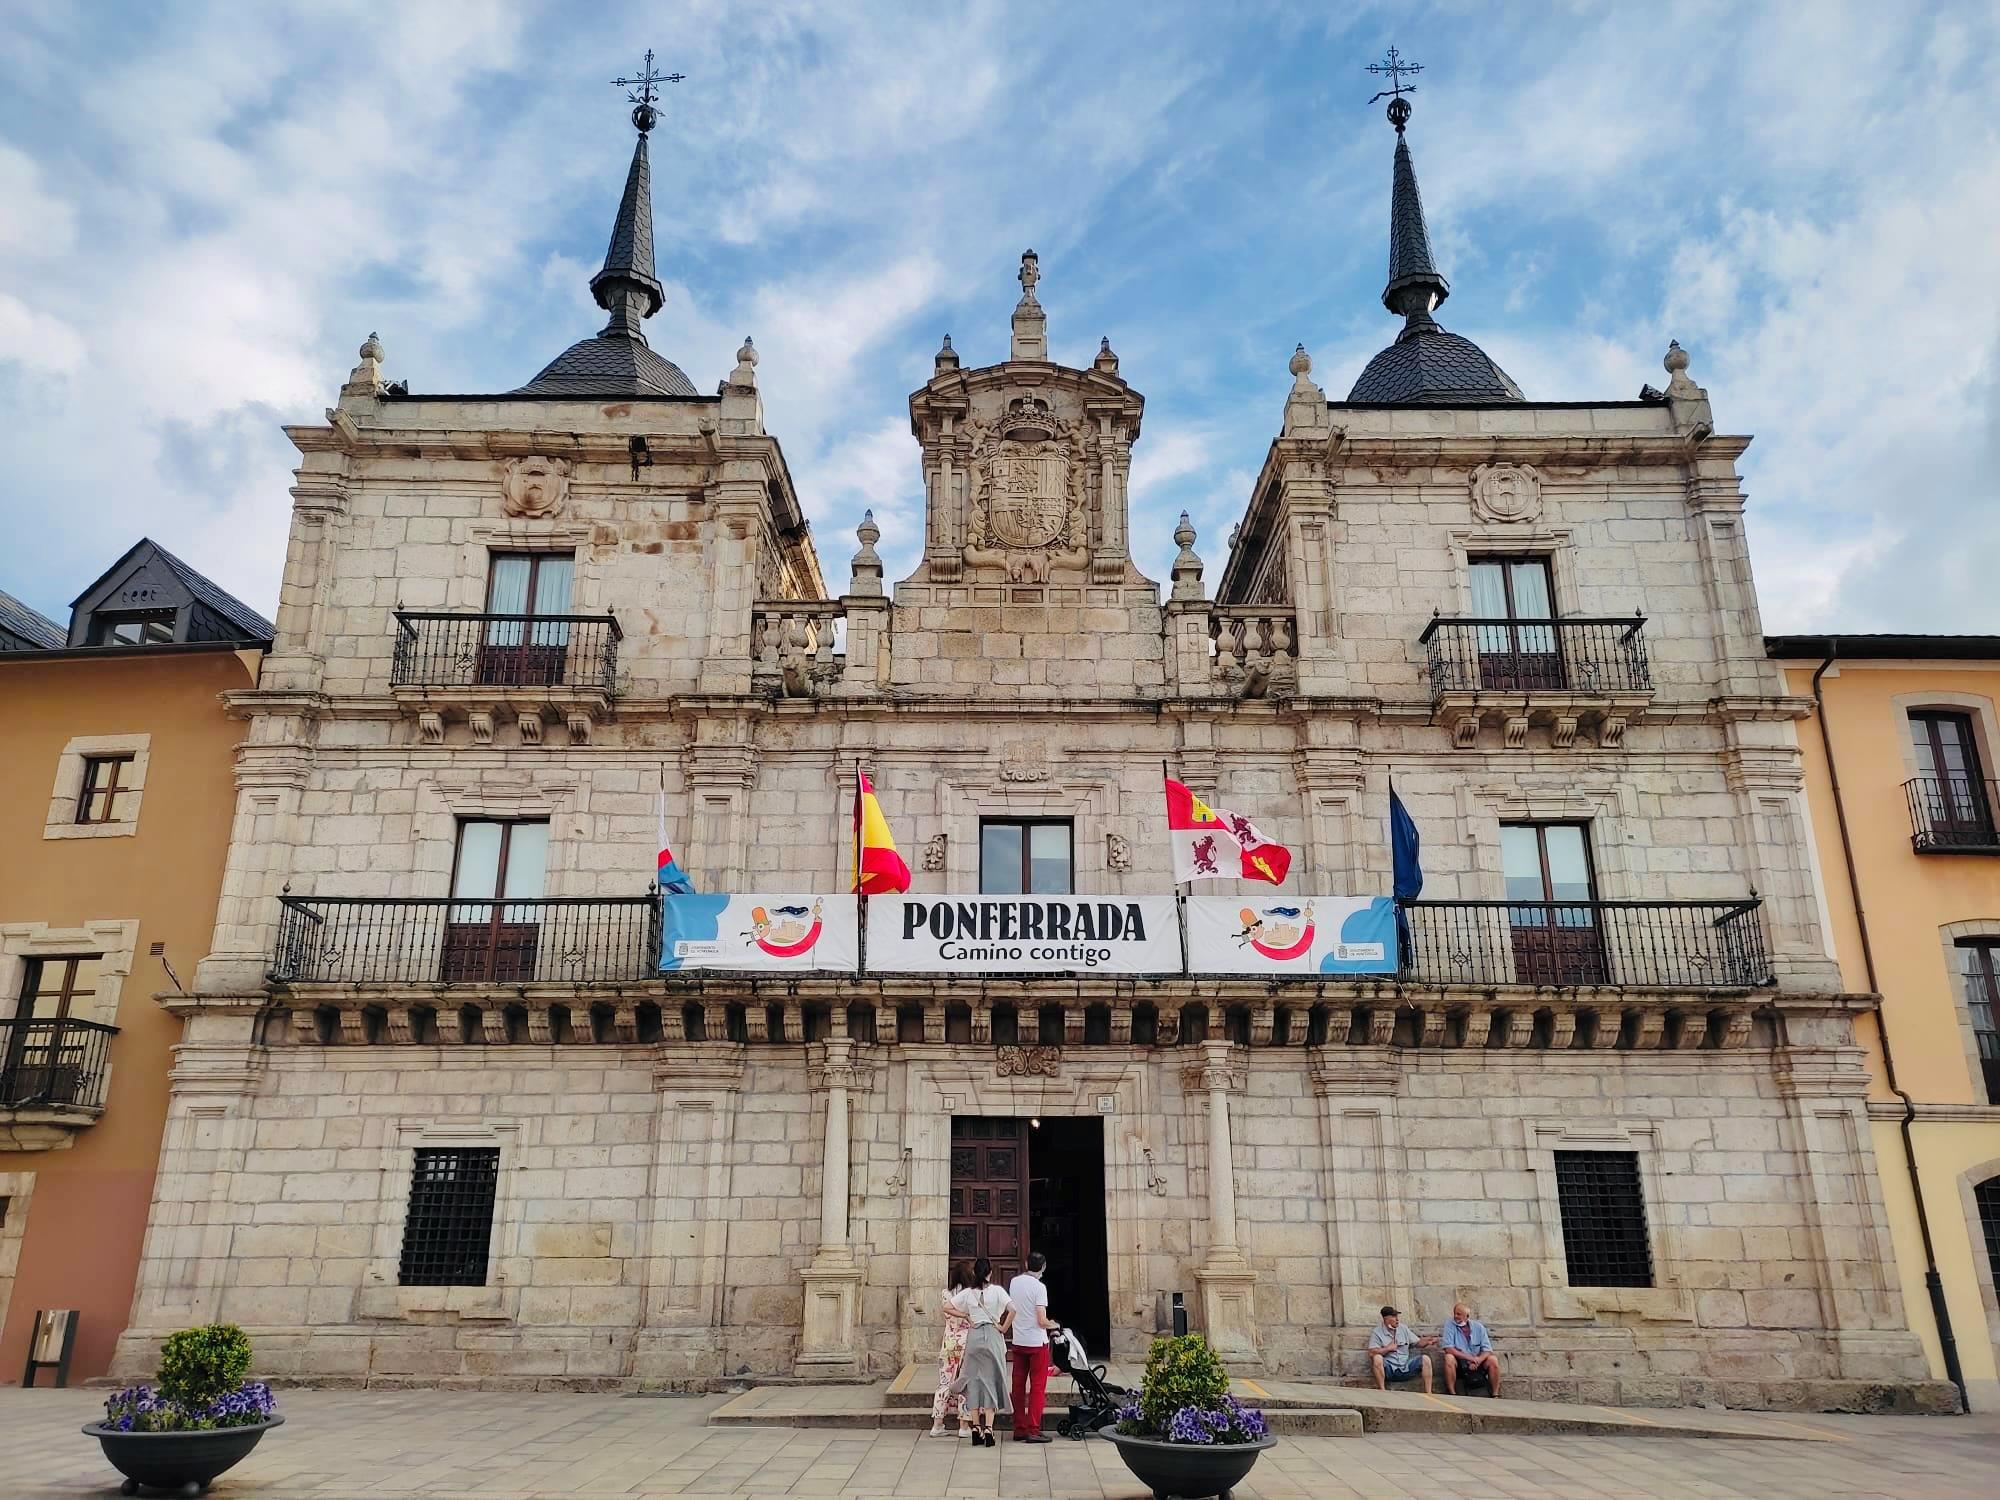 Guided visit to Ponferrada